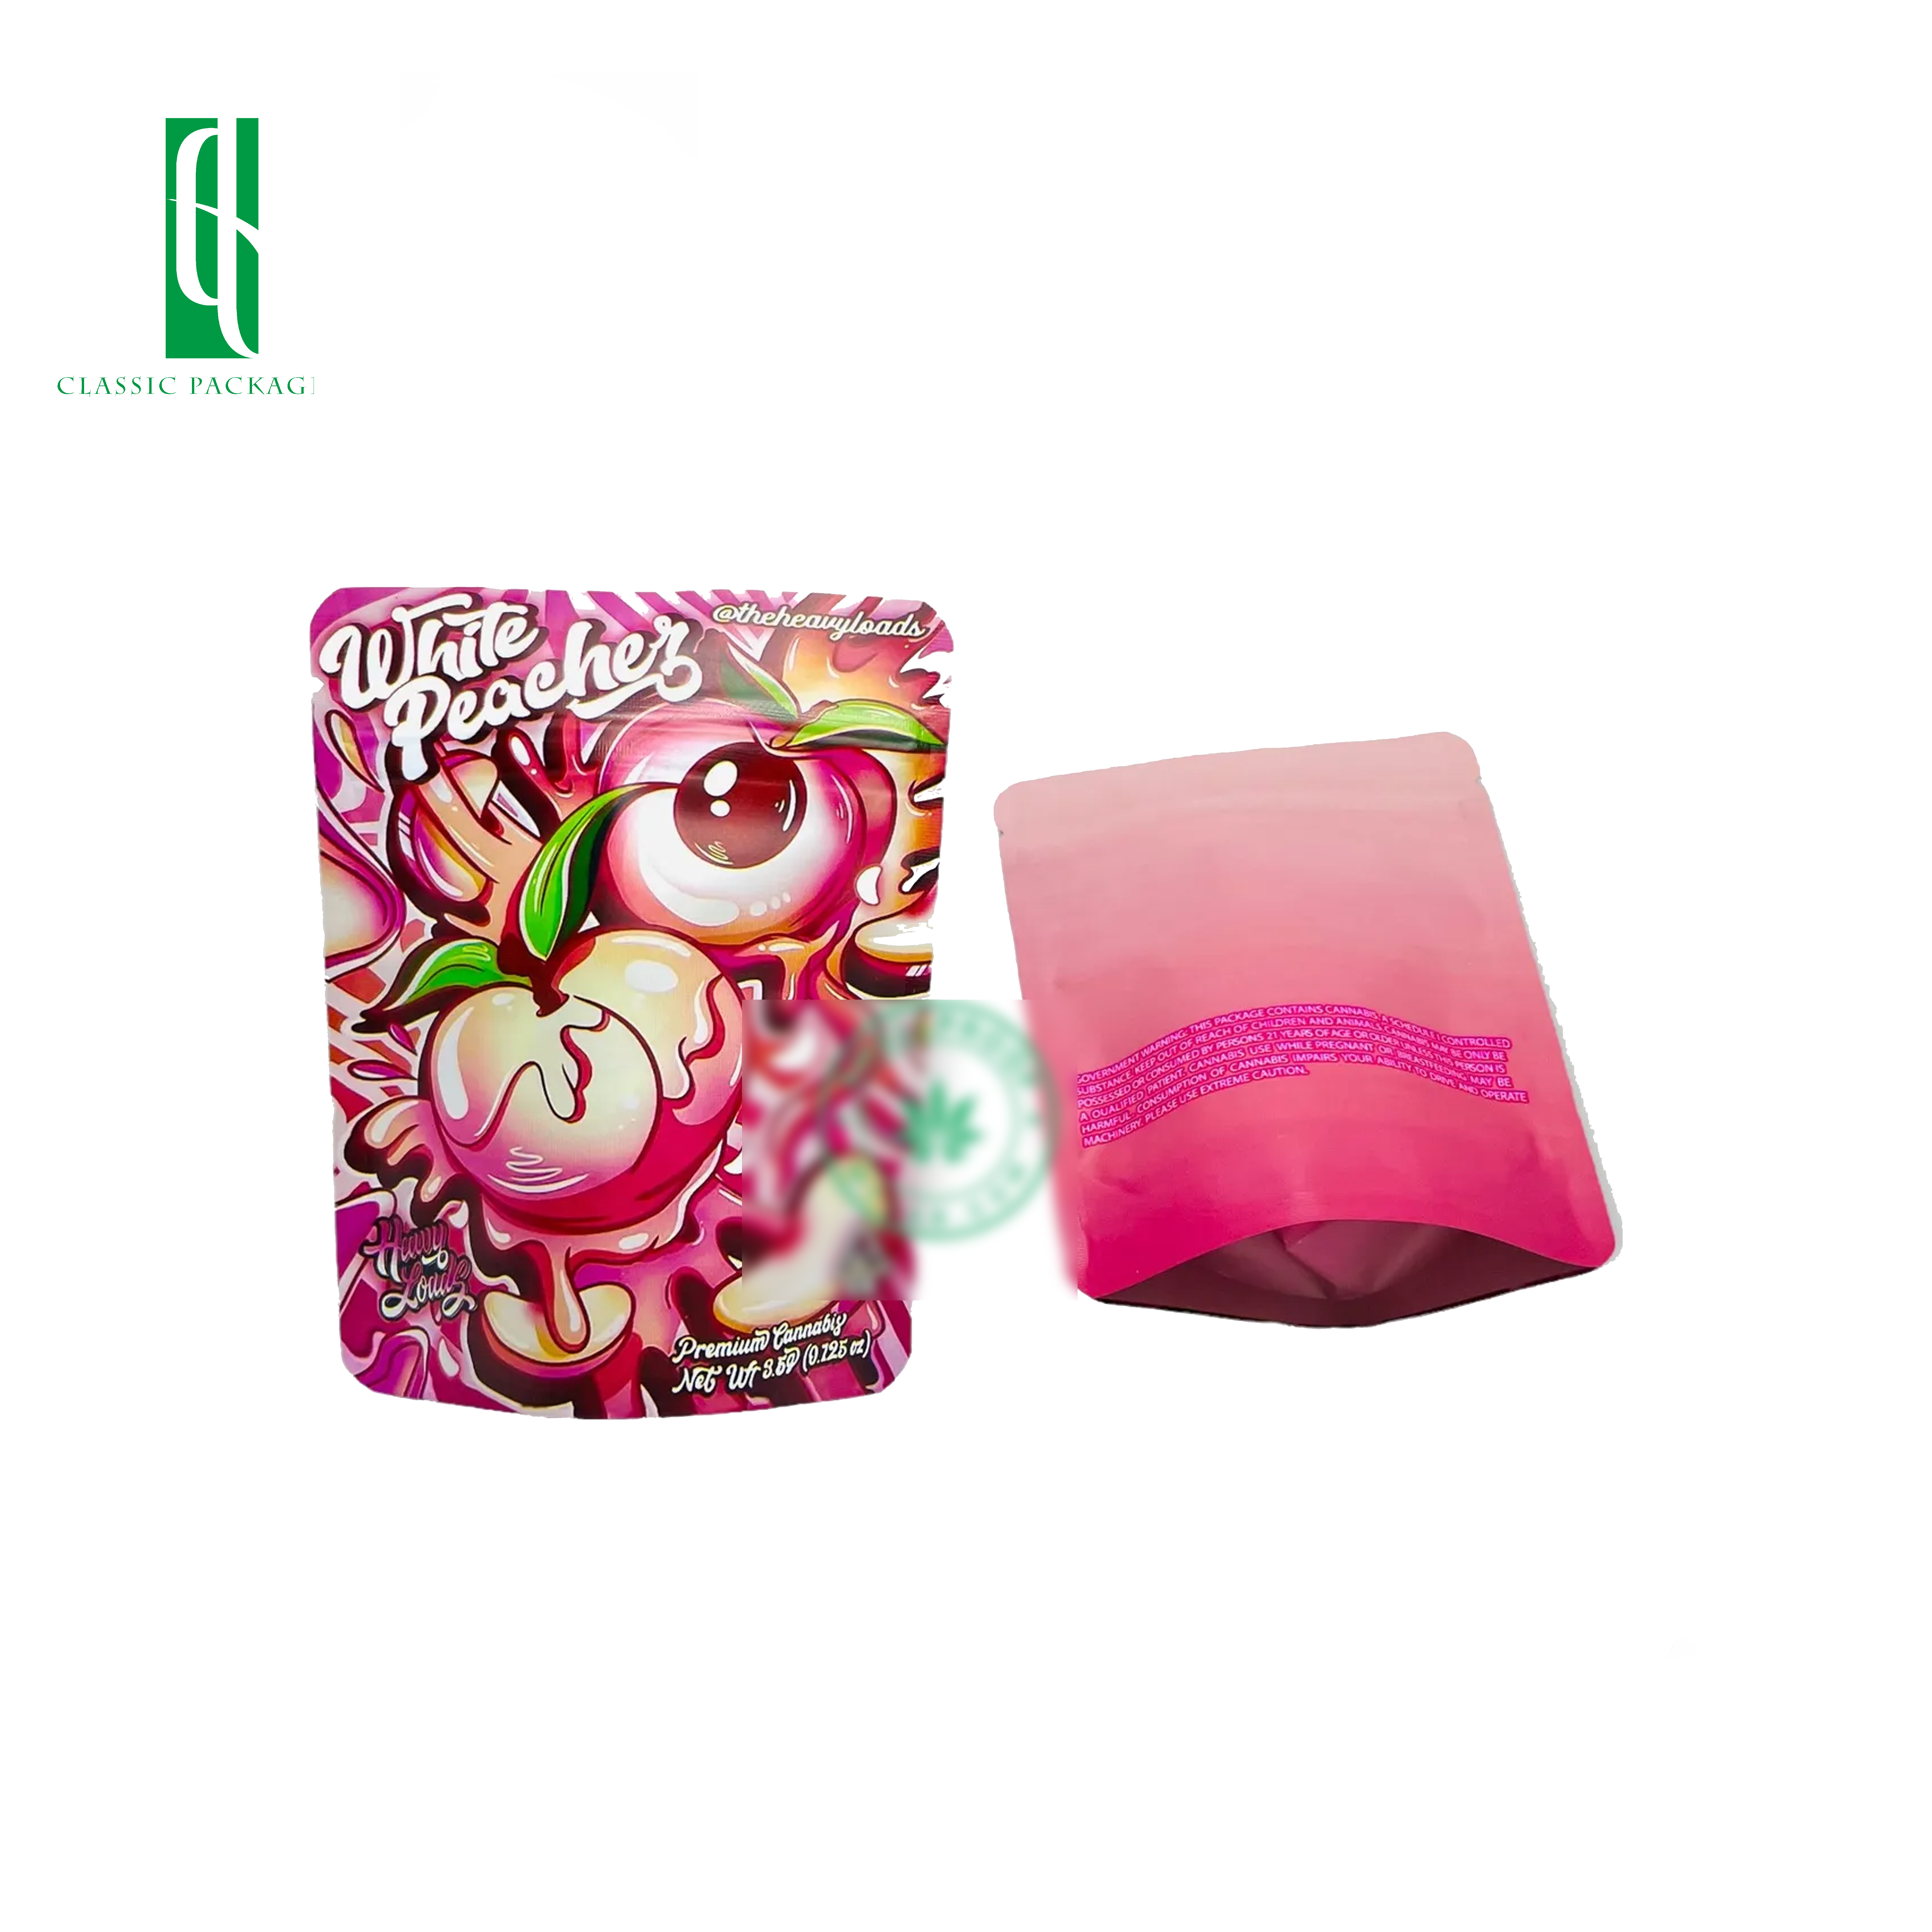 foil laminated plastic resealable ziplock bags exit edibles packaging smell proof candy gummies 3.5g mylar bags custom printed